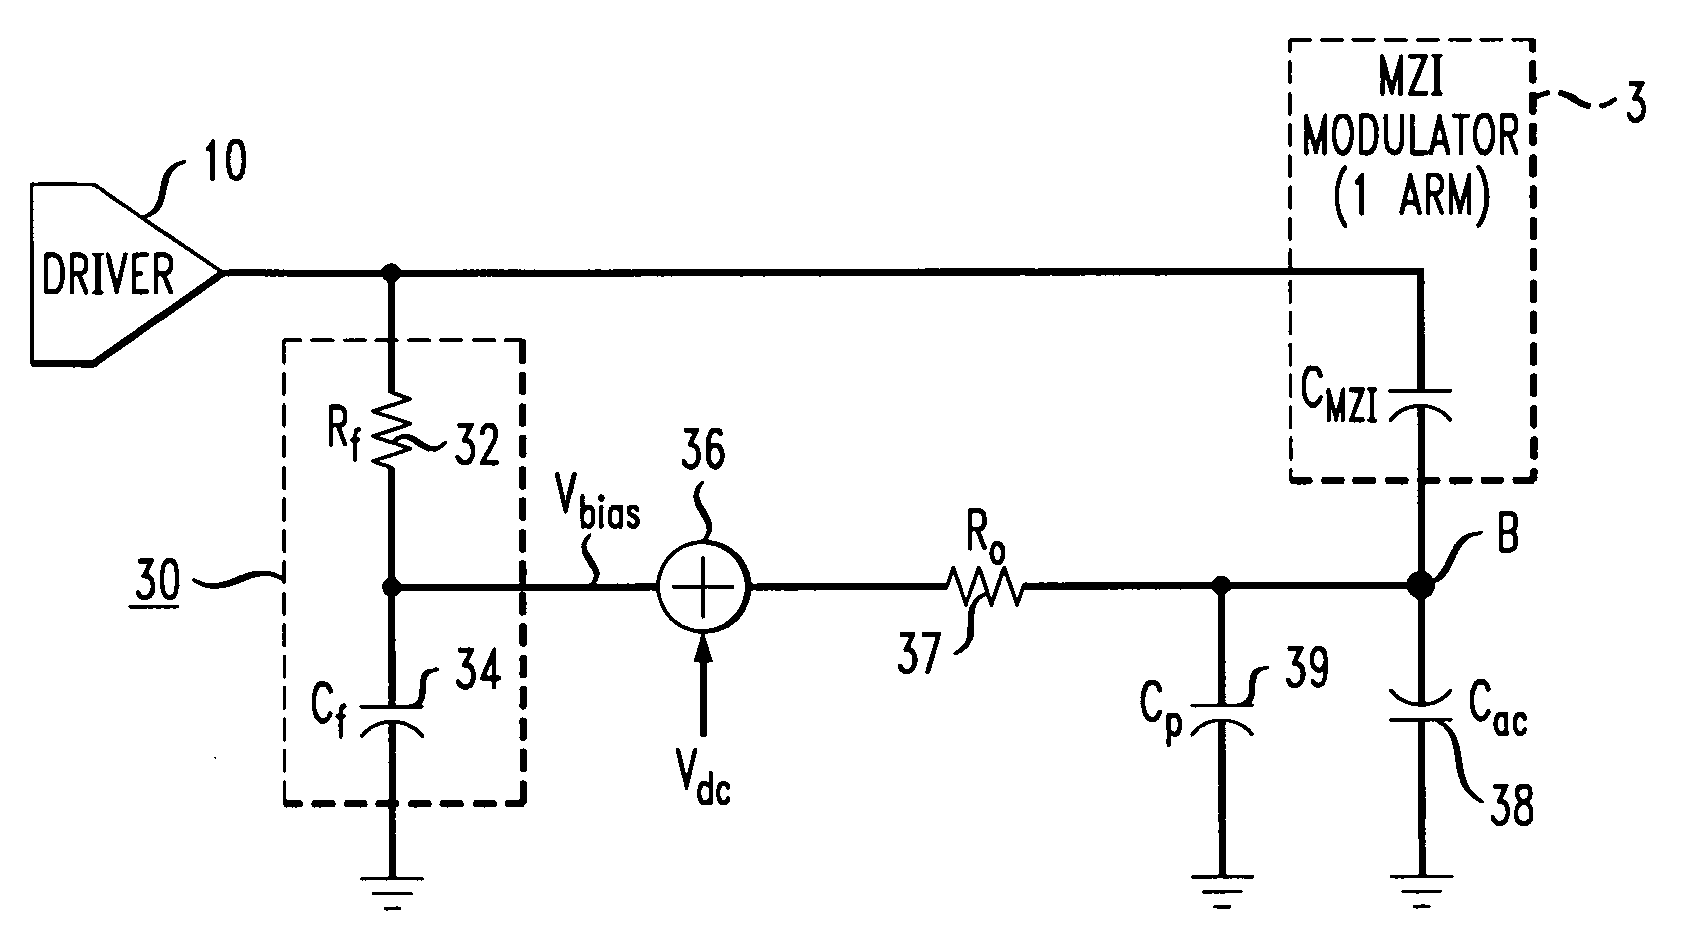 AC-coupled differential drive circuit for opto-electronic modulators